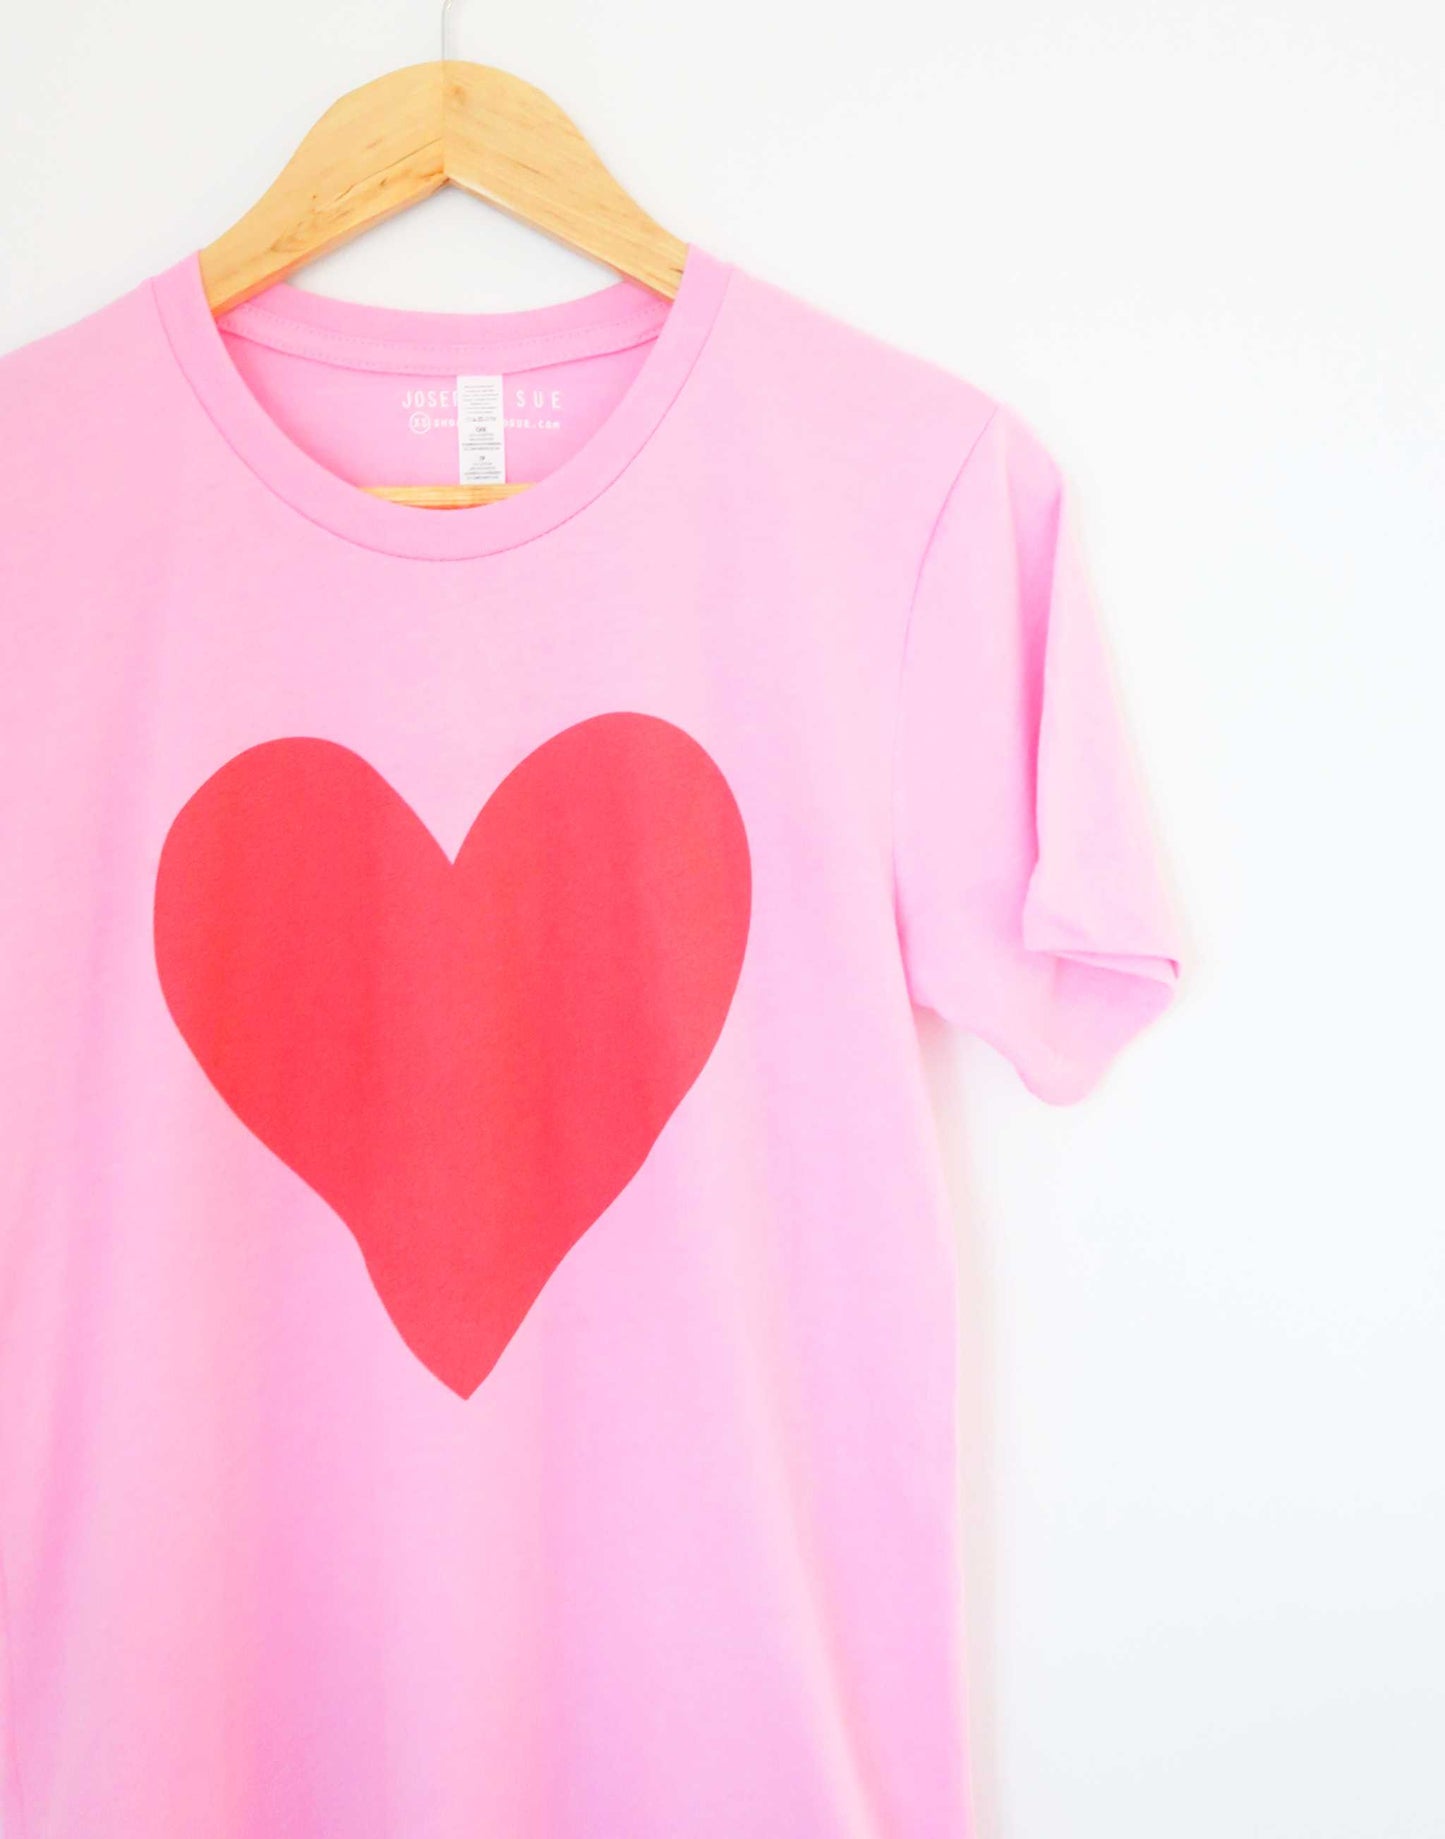 Have a Heart T-Shirt